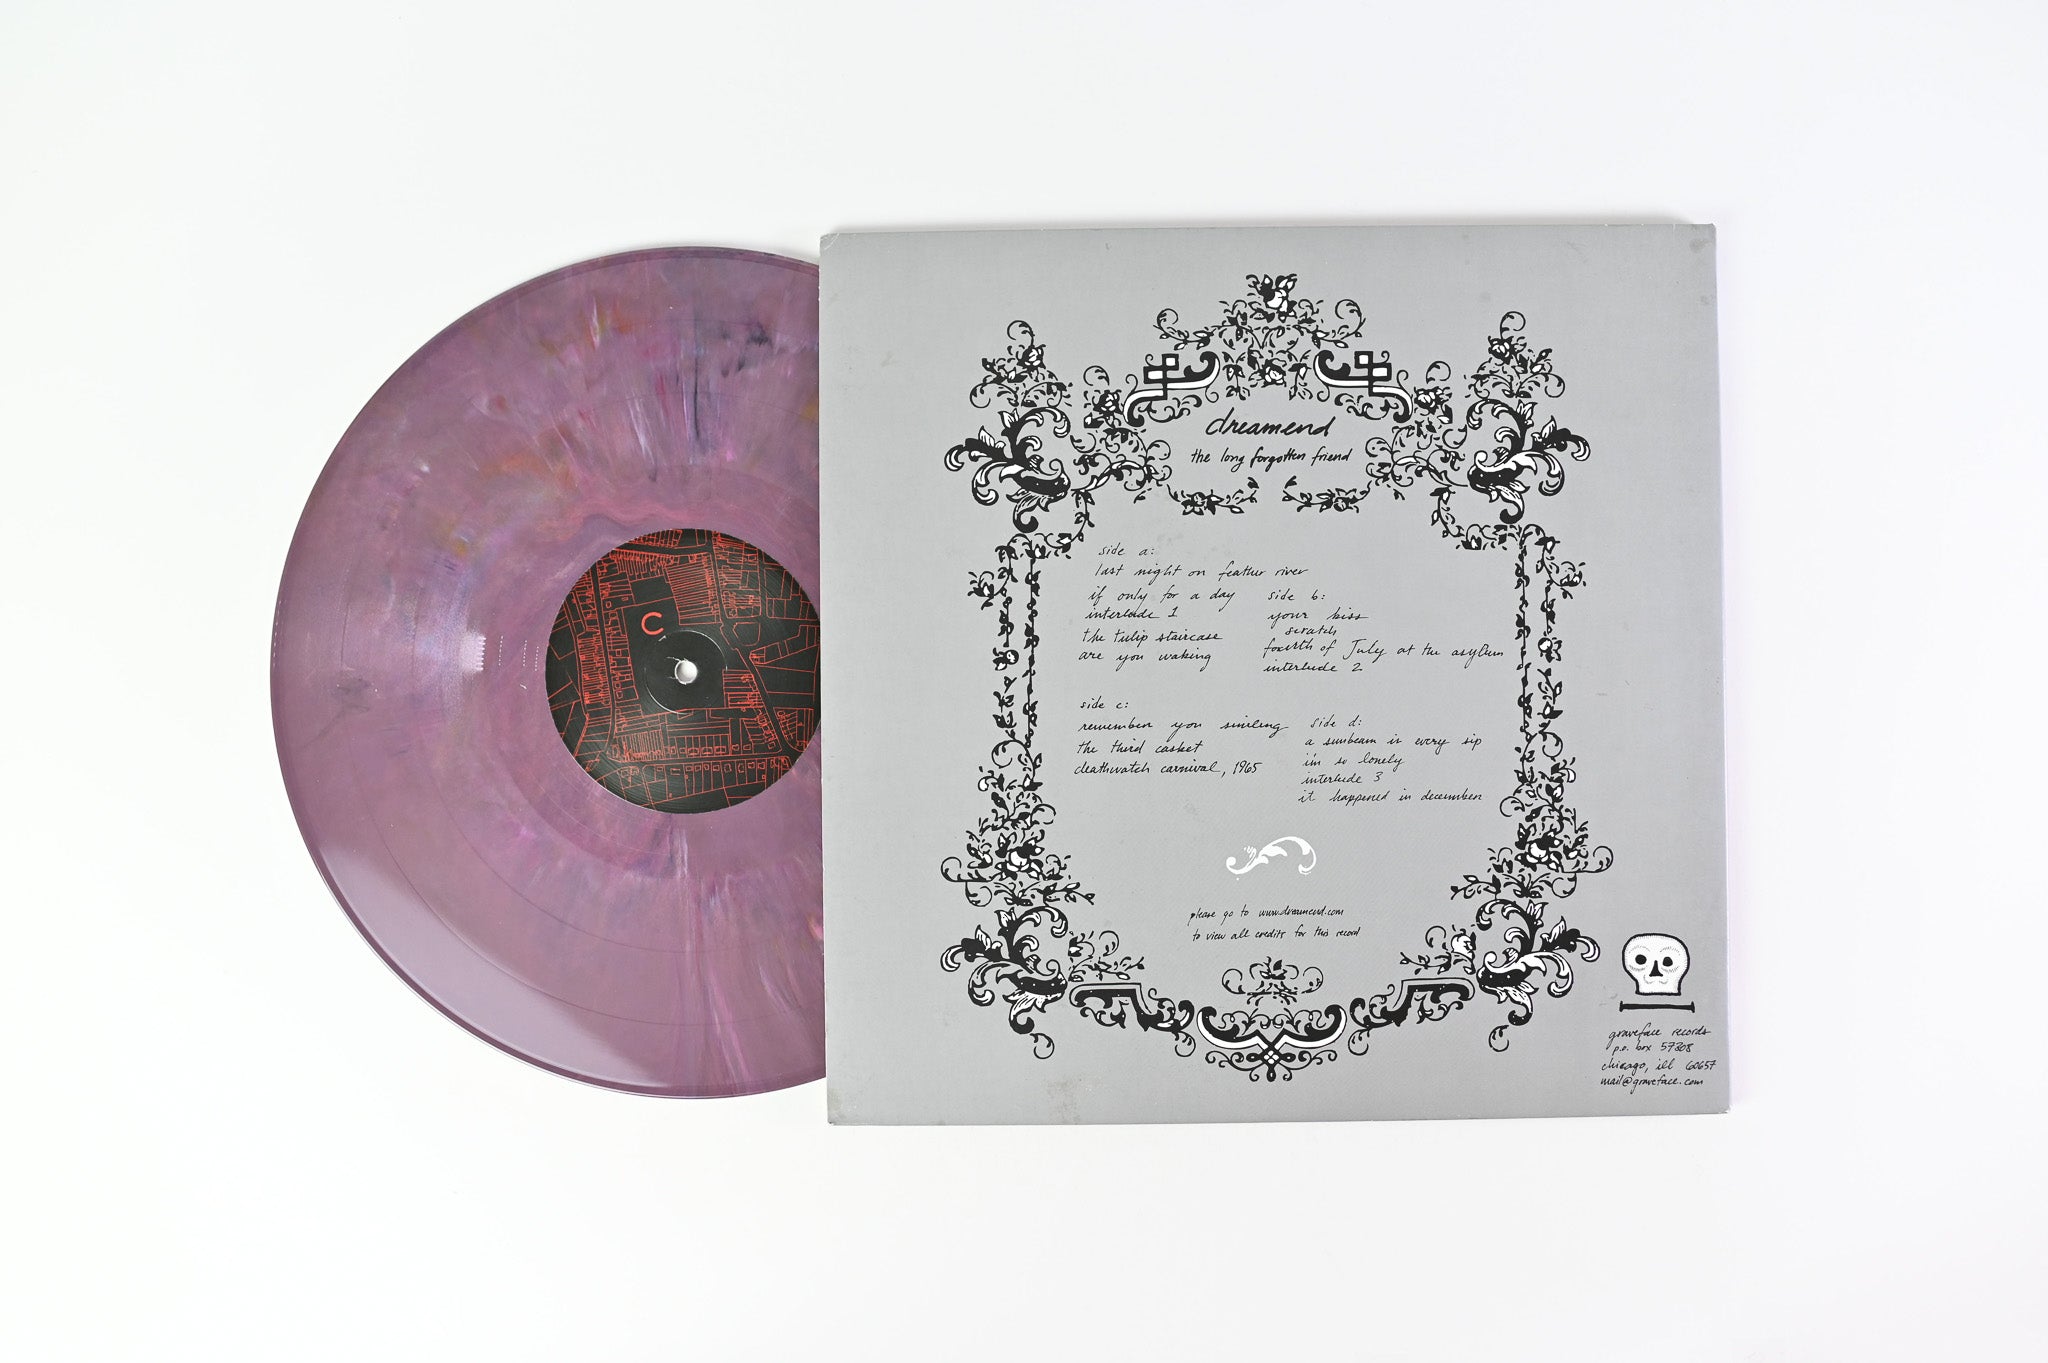 Dreamend - The Long Forgotten Friend on Graveface Ltd Marbled Pink and Purple Vinyl